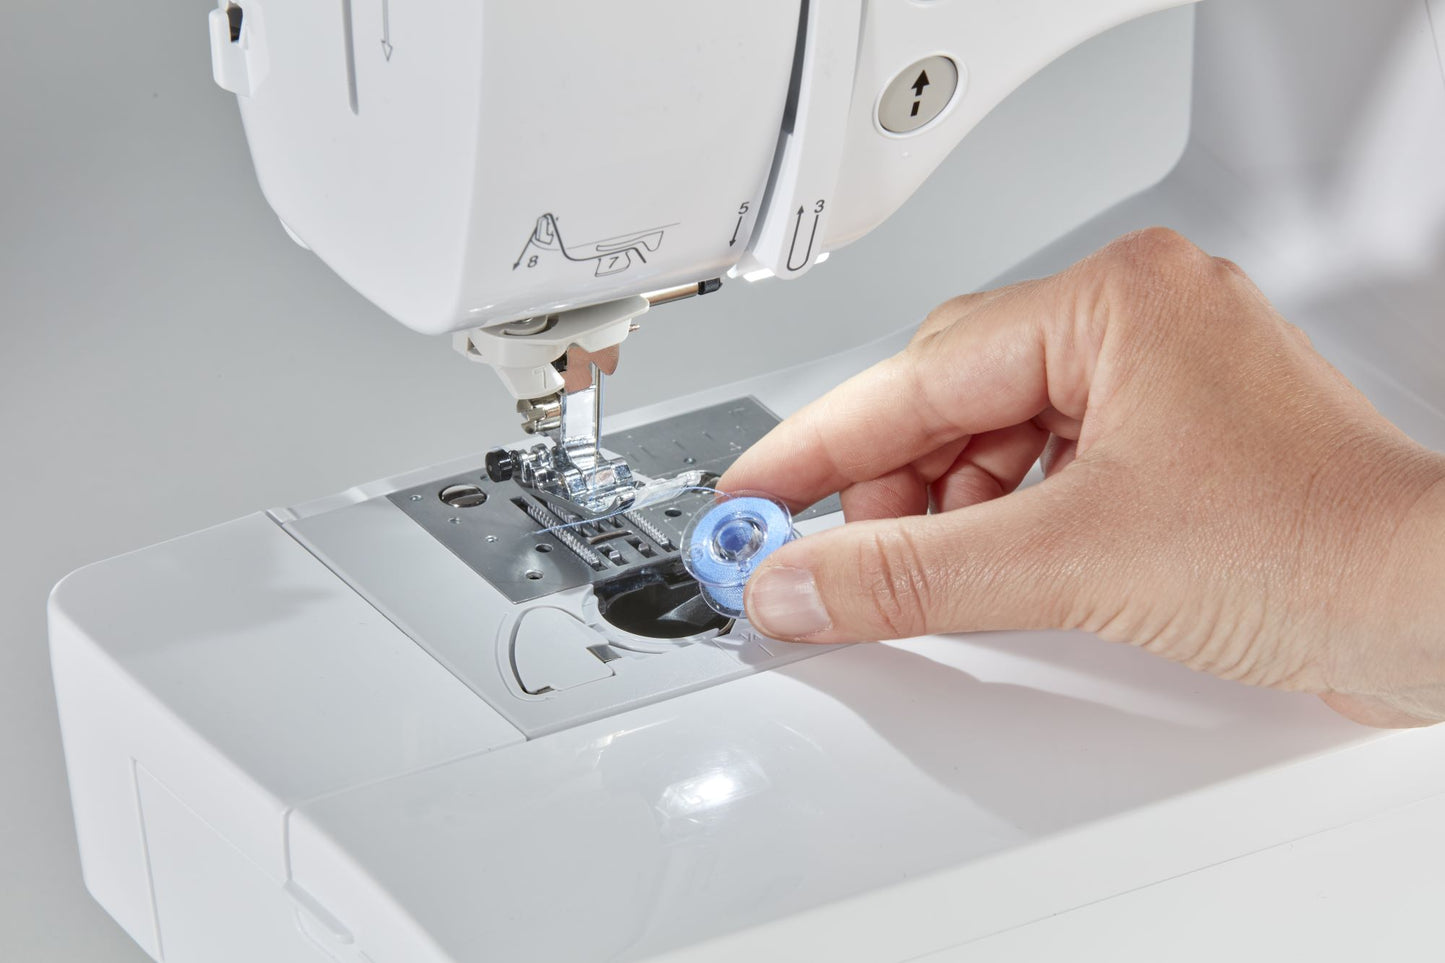 Brother Innovis A50 Sewing Machine